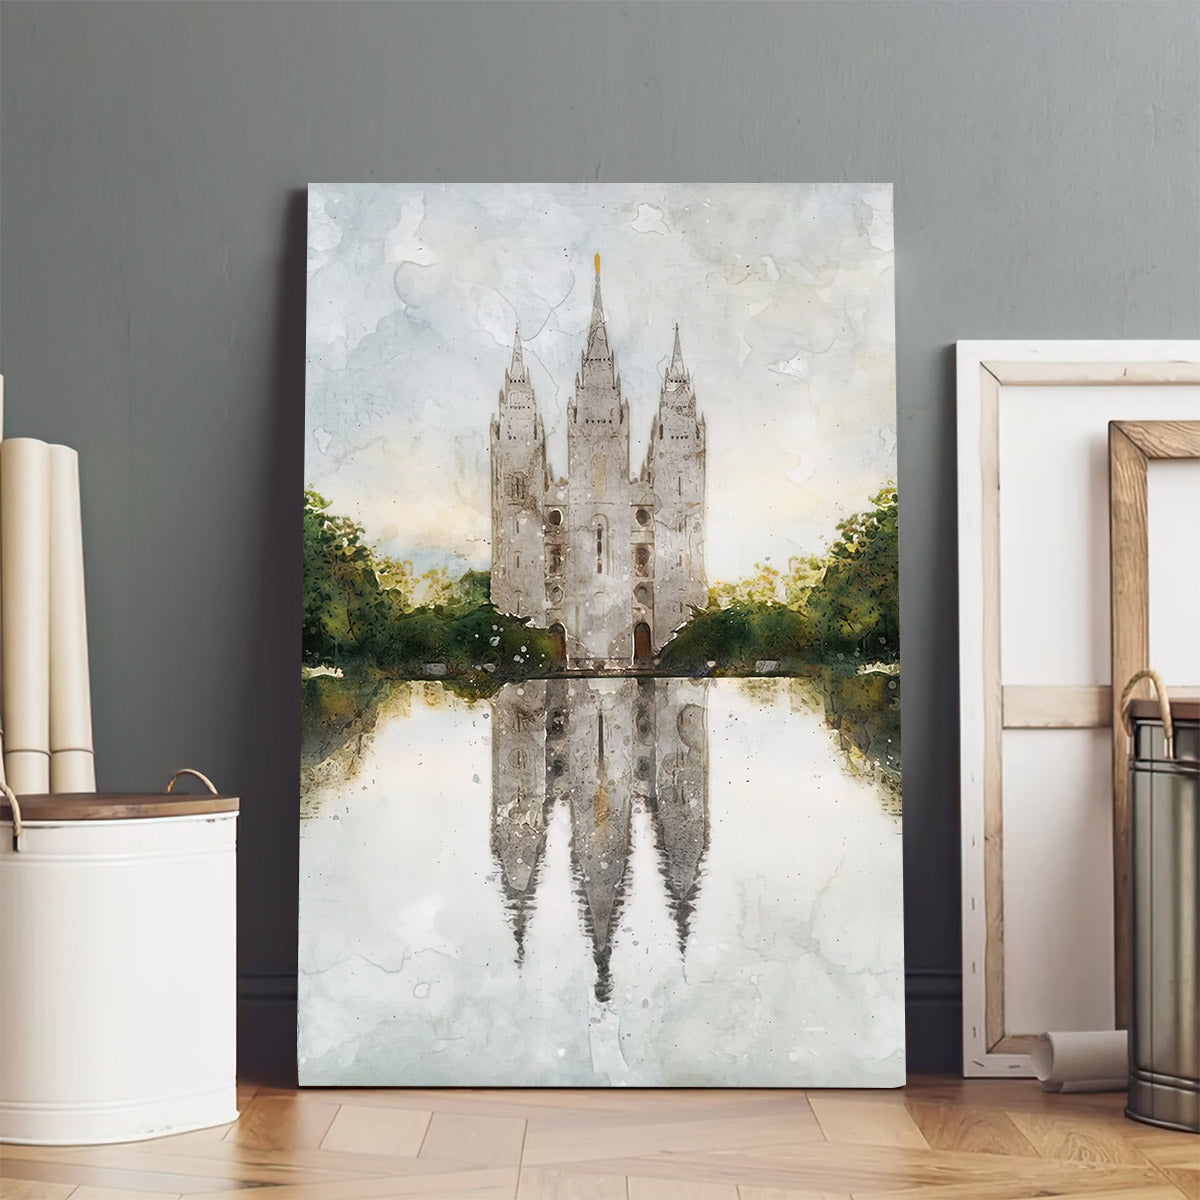 Salt Lake Temple 4 Canvas Pictures - Temple Canvas Wall Decor - Christian Canvas Wall Art